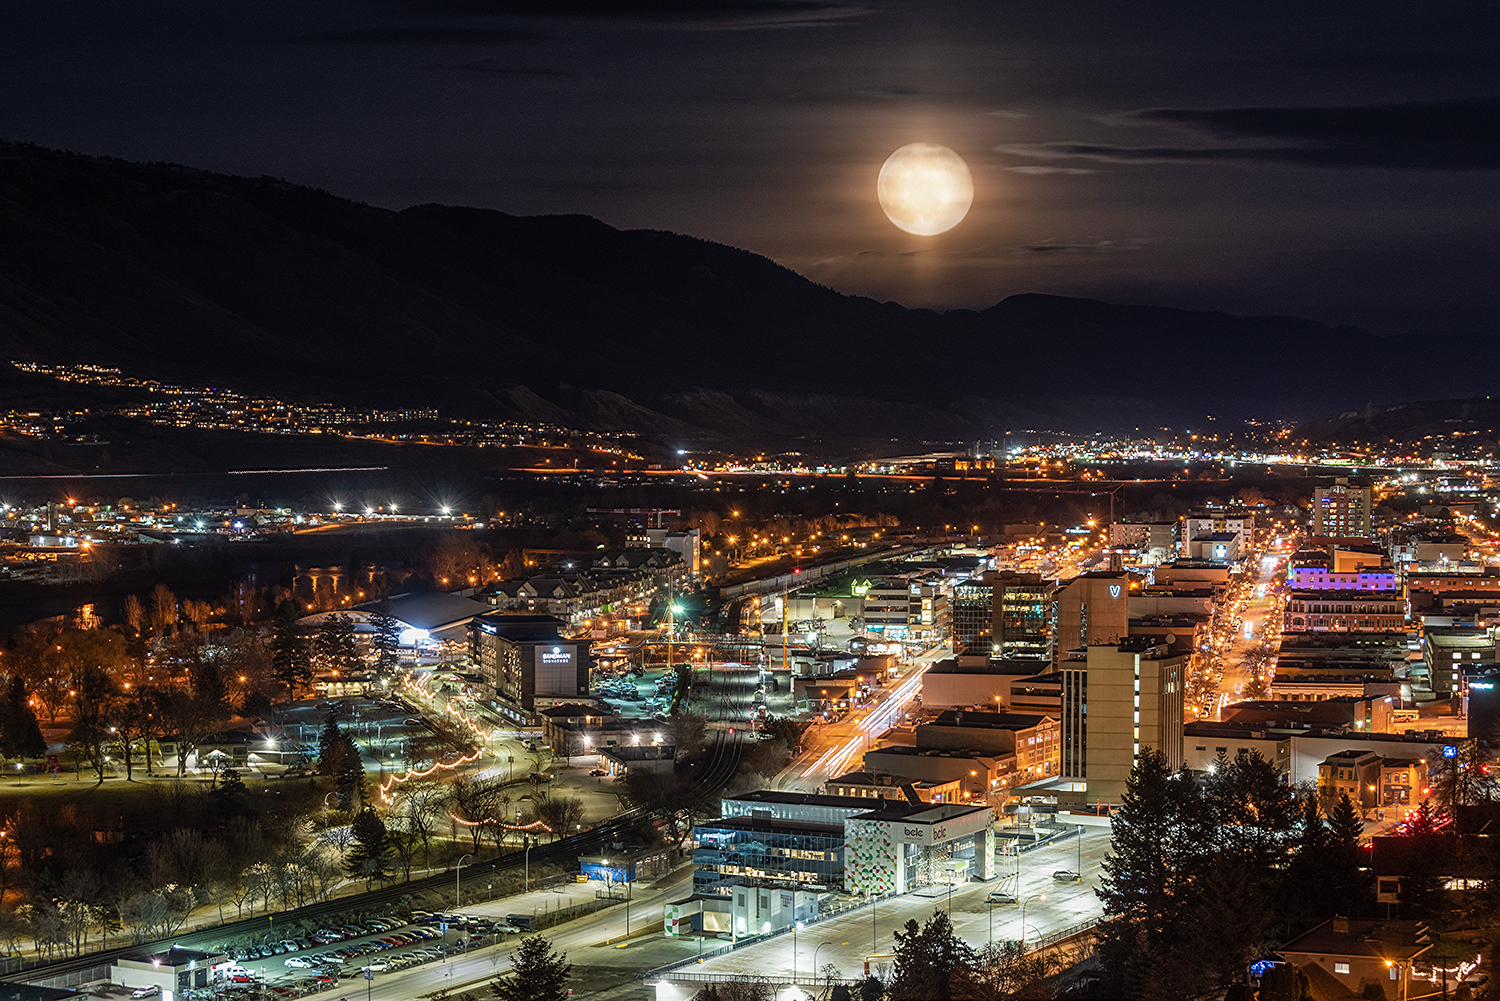 nightlife of city with hazy full moon and mountain